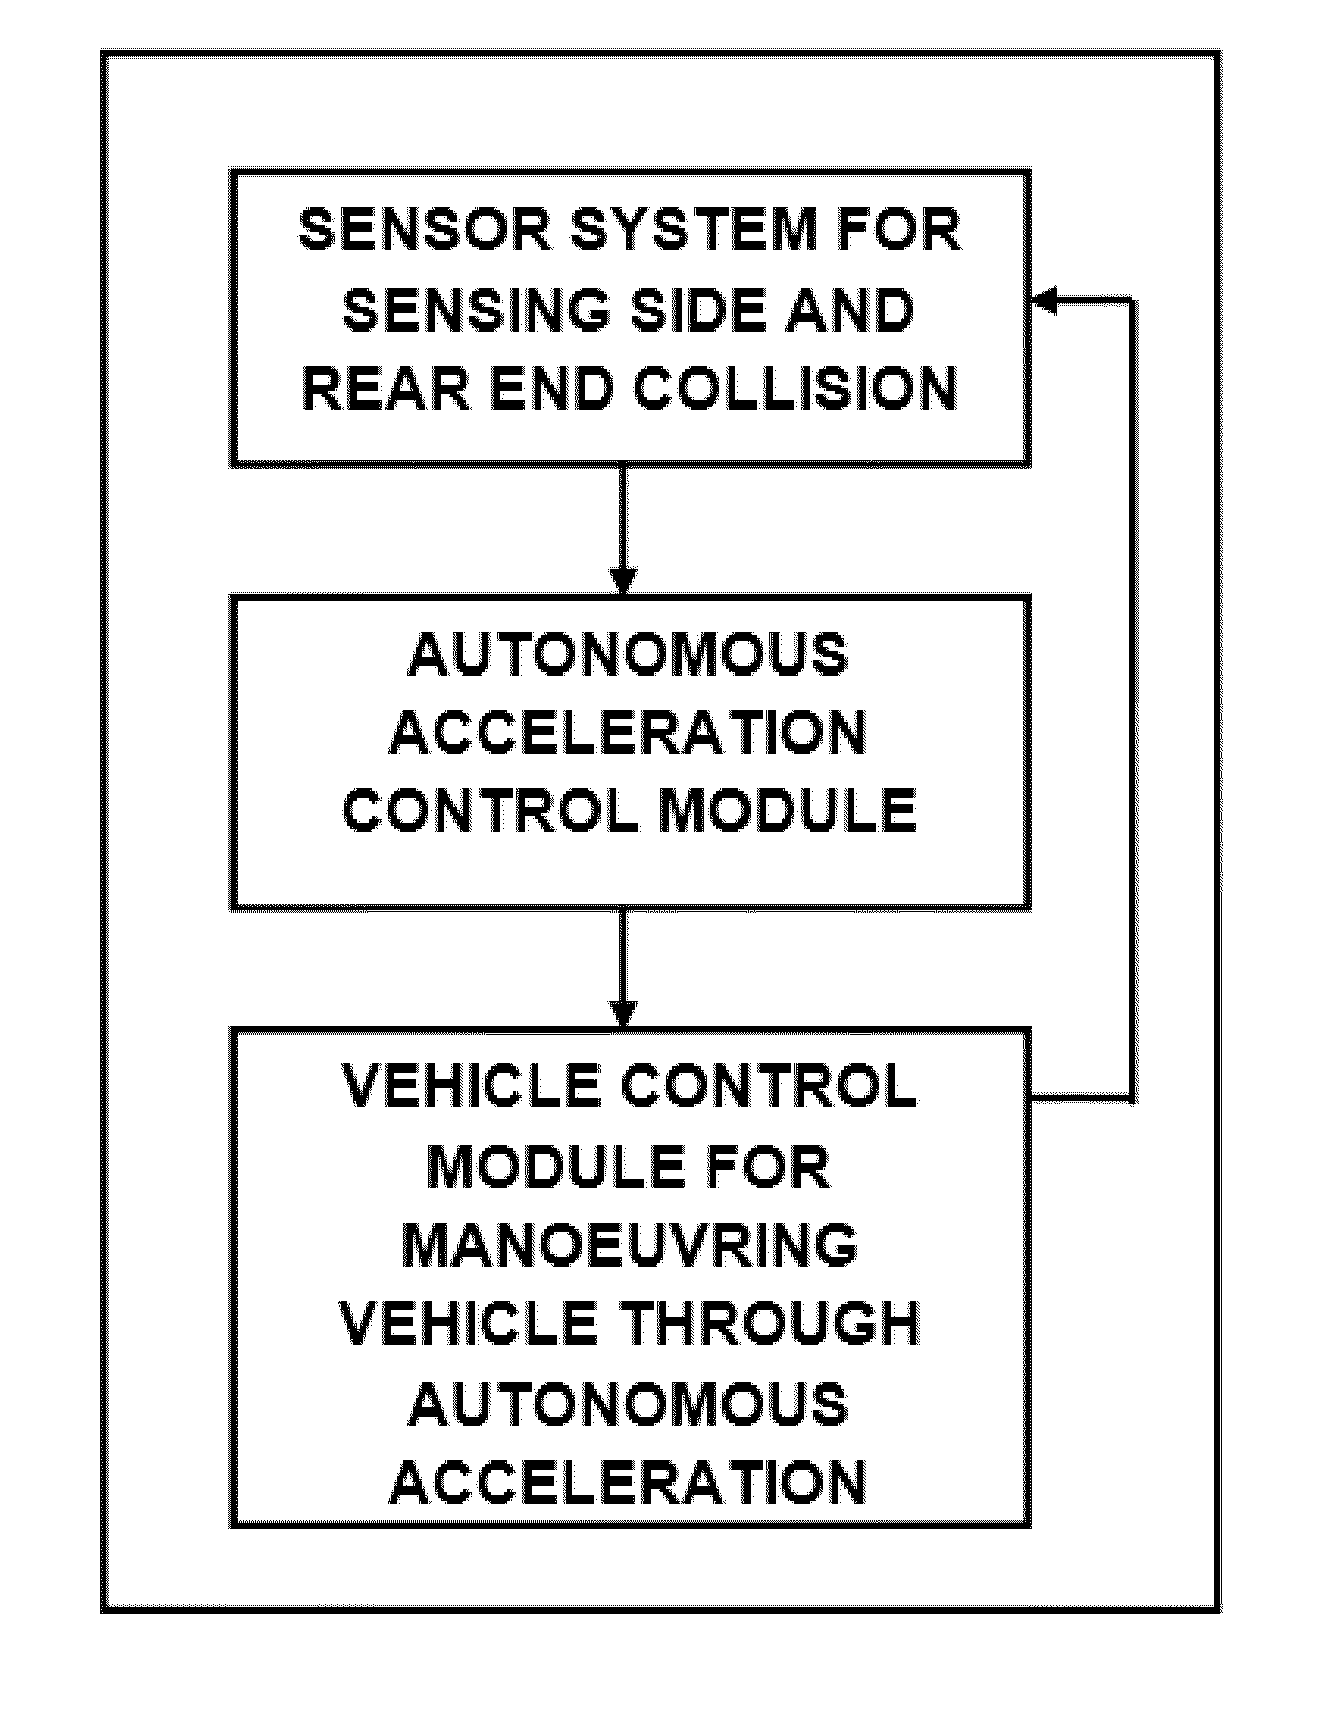 Smart active adaptive autonomous short distance manoeuvring & directional warning system with optimal acceleration for avoiding or mitigating imminent & inevitable side impact and rear end collision